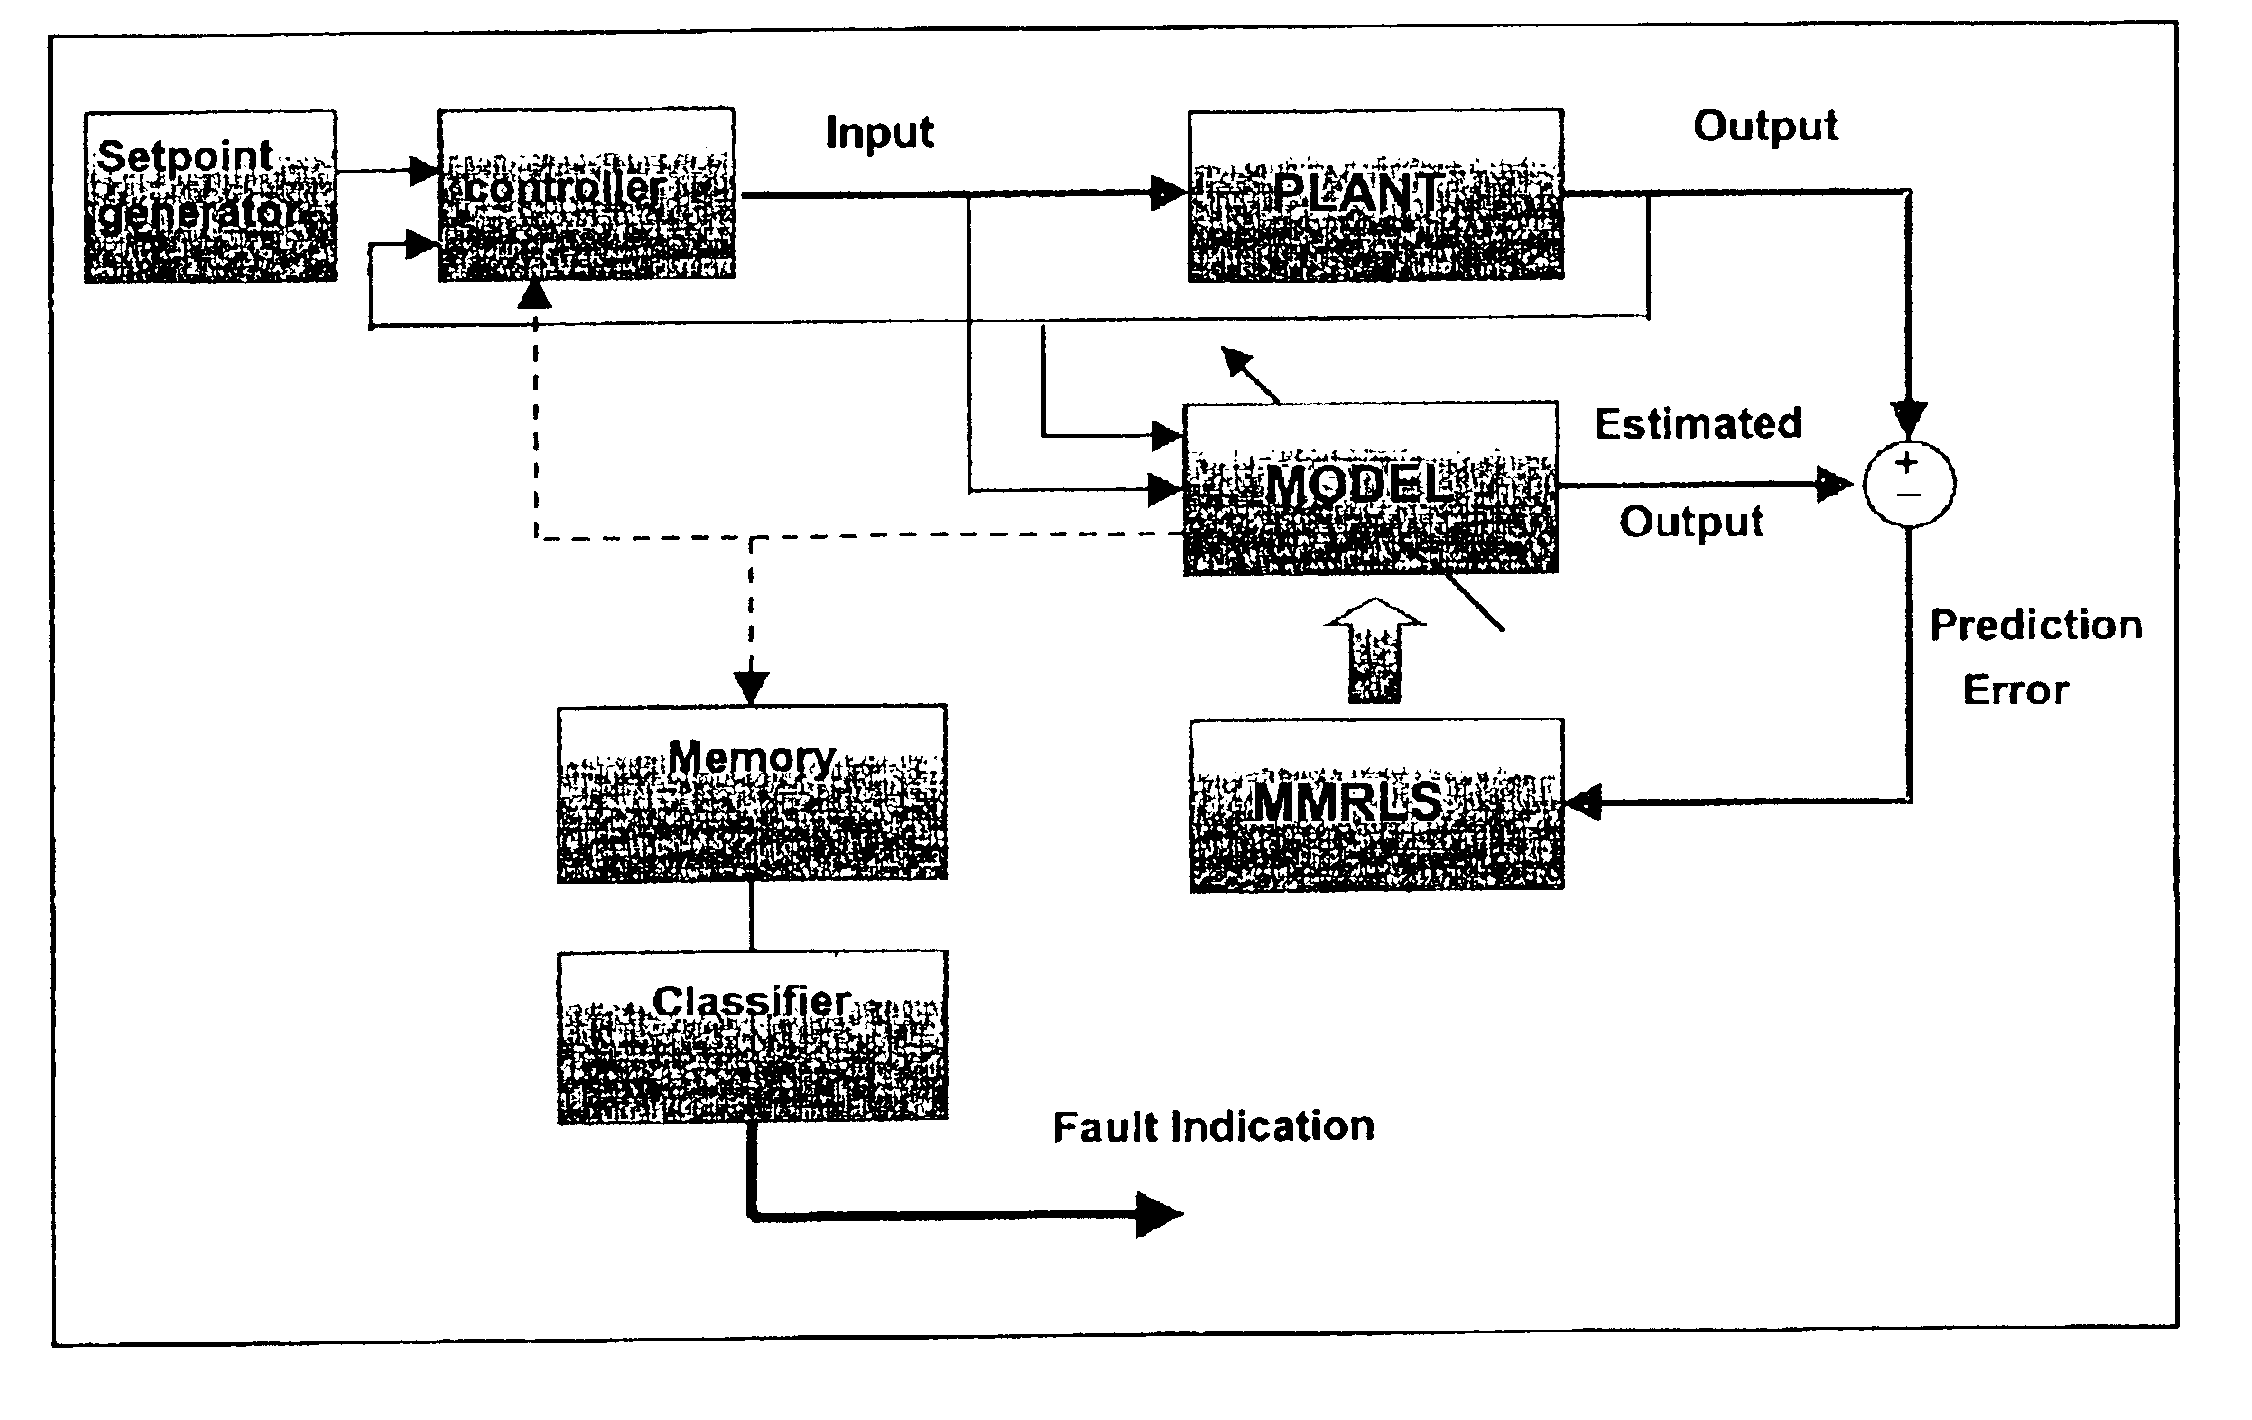 Method of controlling combustion in a homogeneous charge compression ignition engine